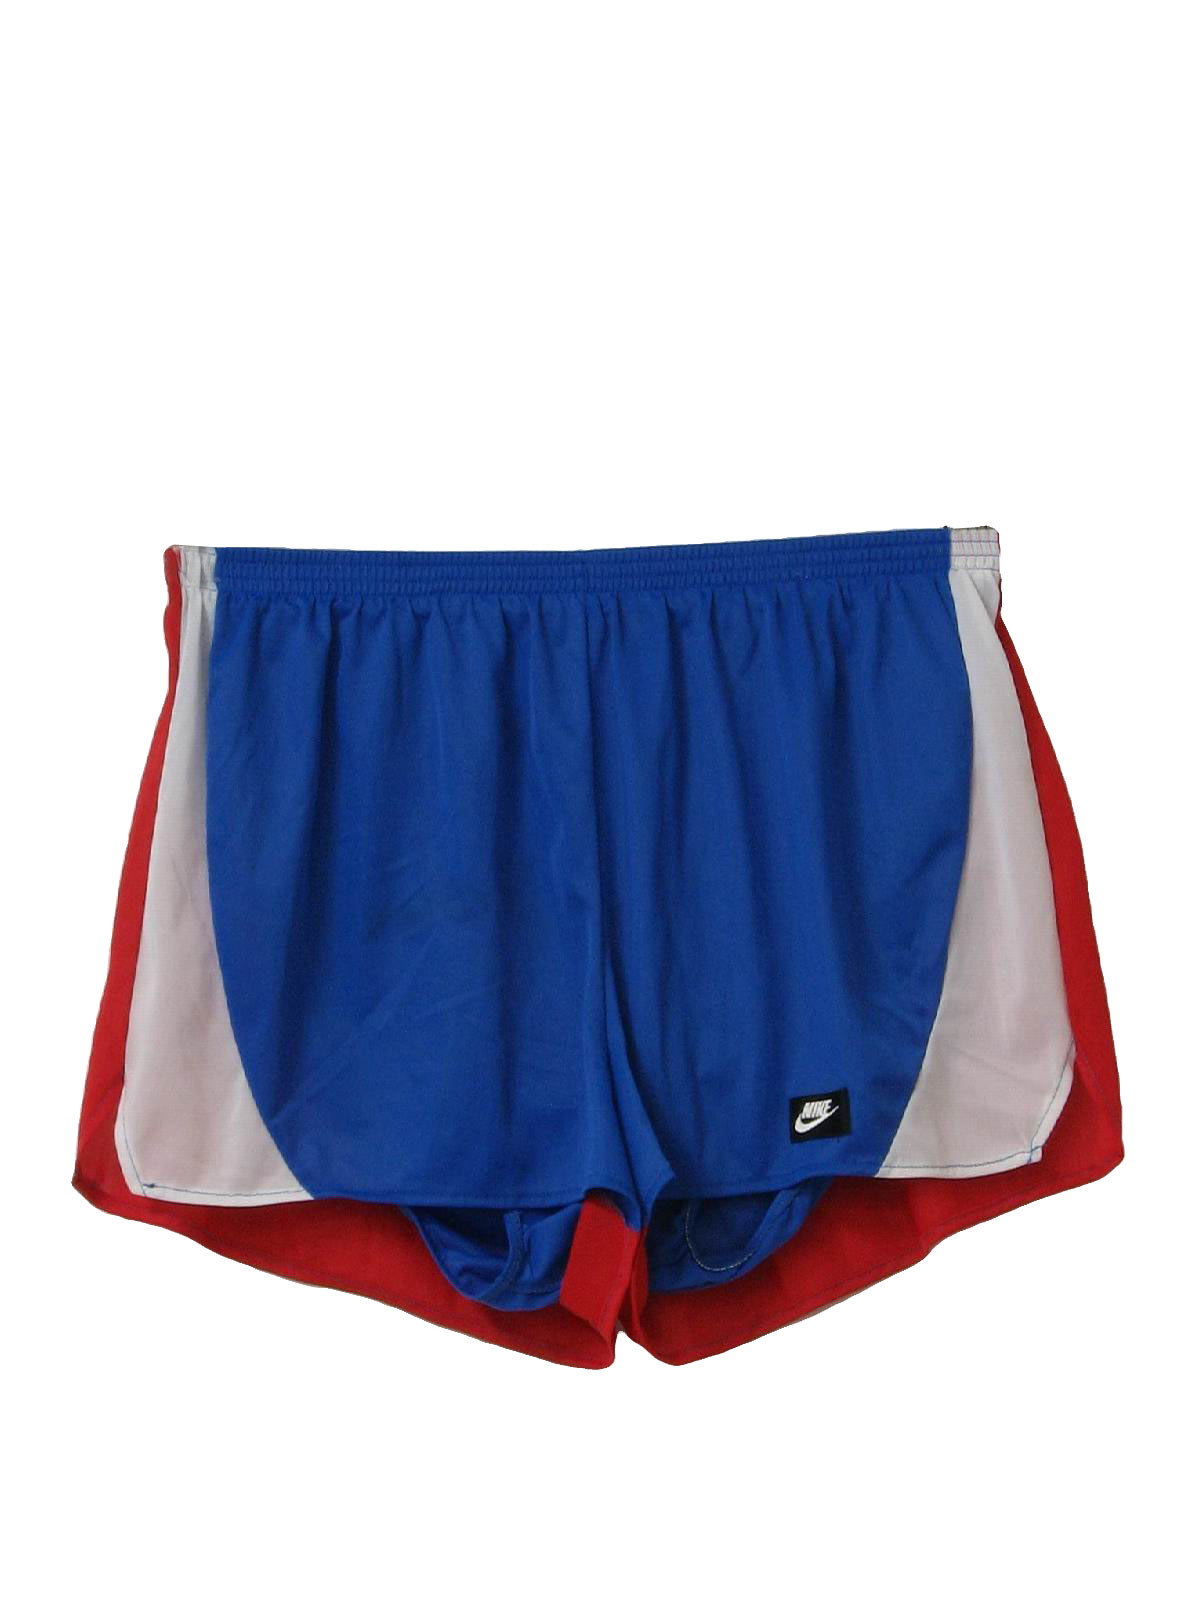 80s Vintage Nike Shorts: 80s -Nike- Mens blue, red and white color ...